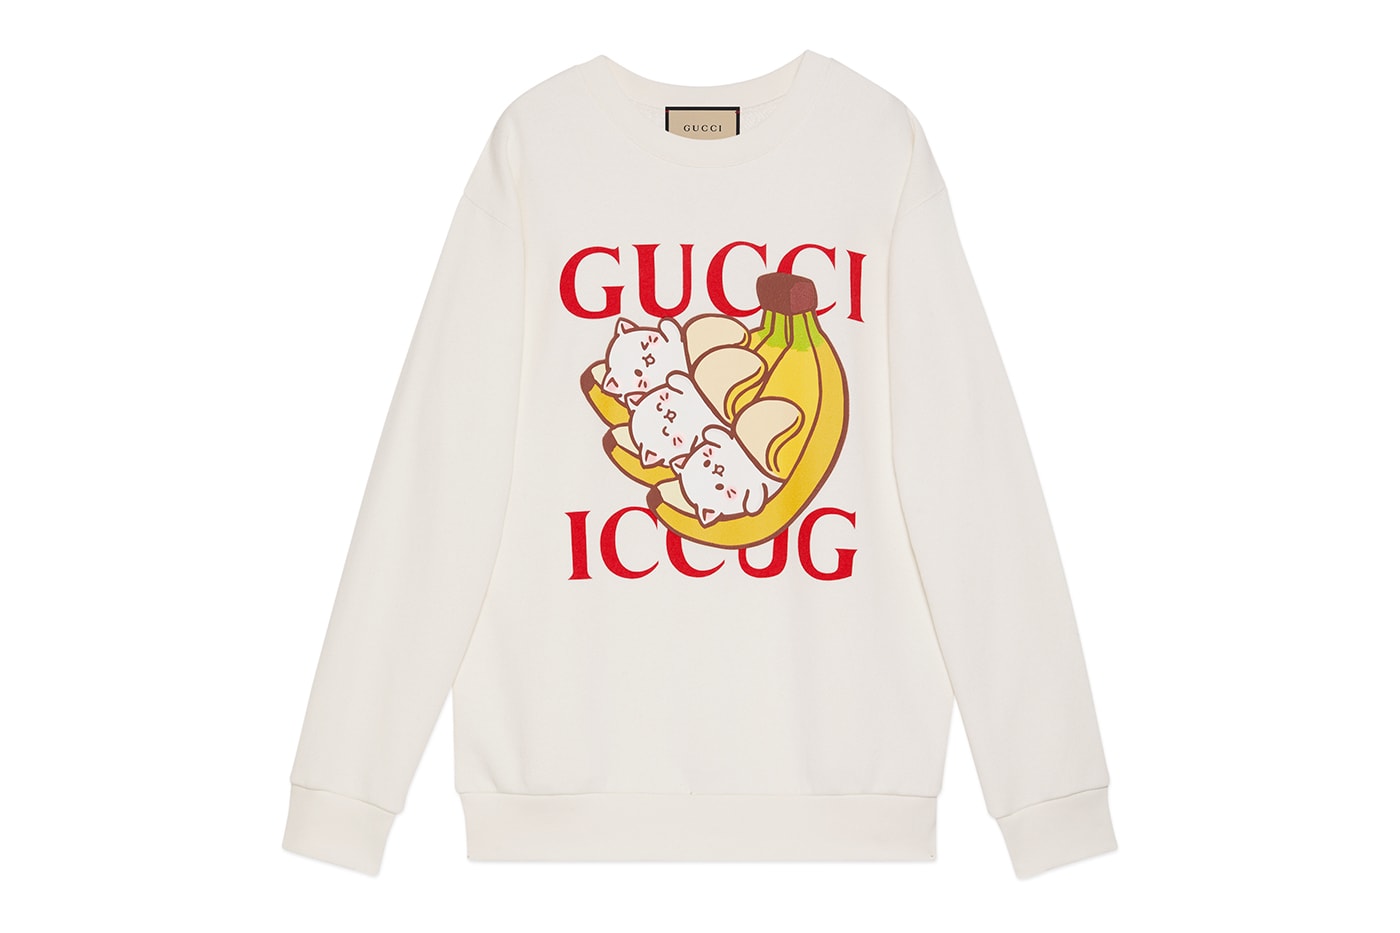 Crunchyroll - This One Piece x GUCCI Collab is